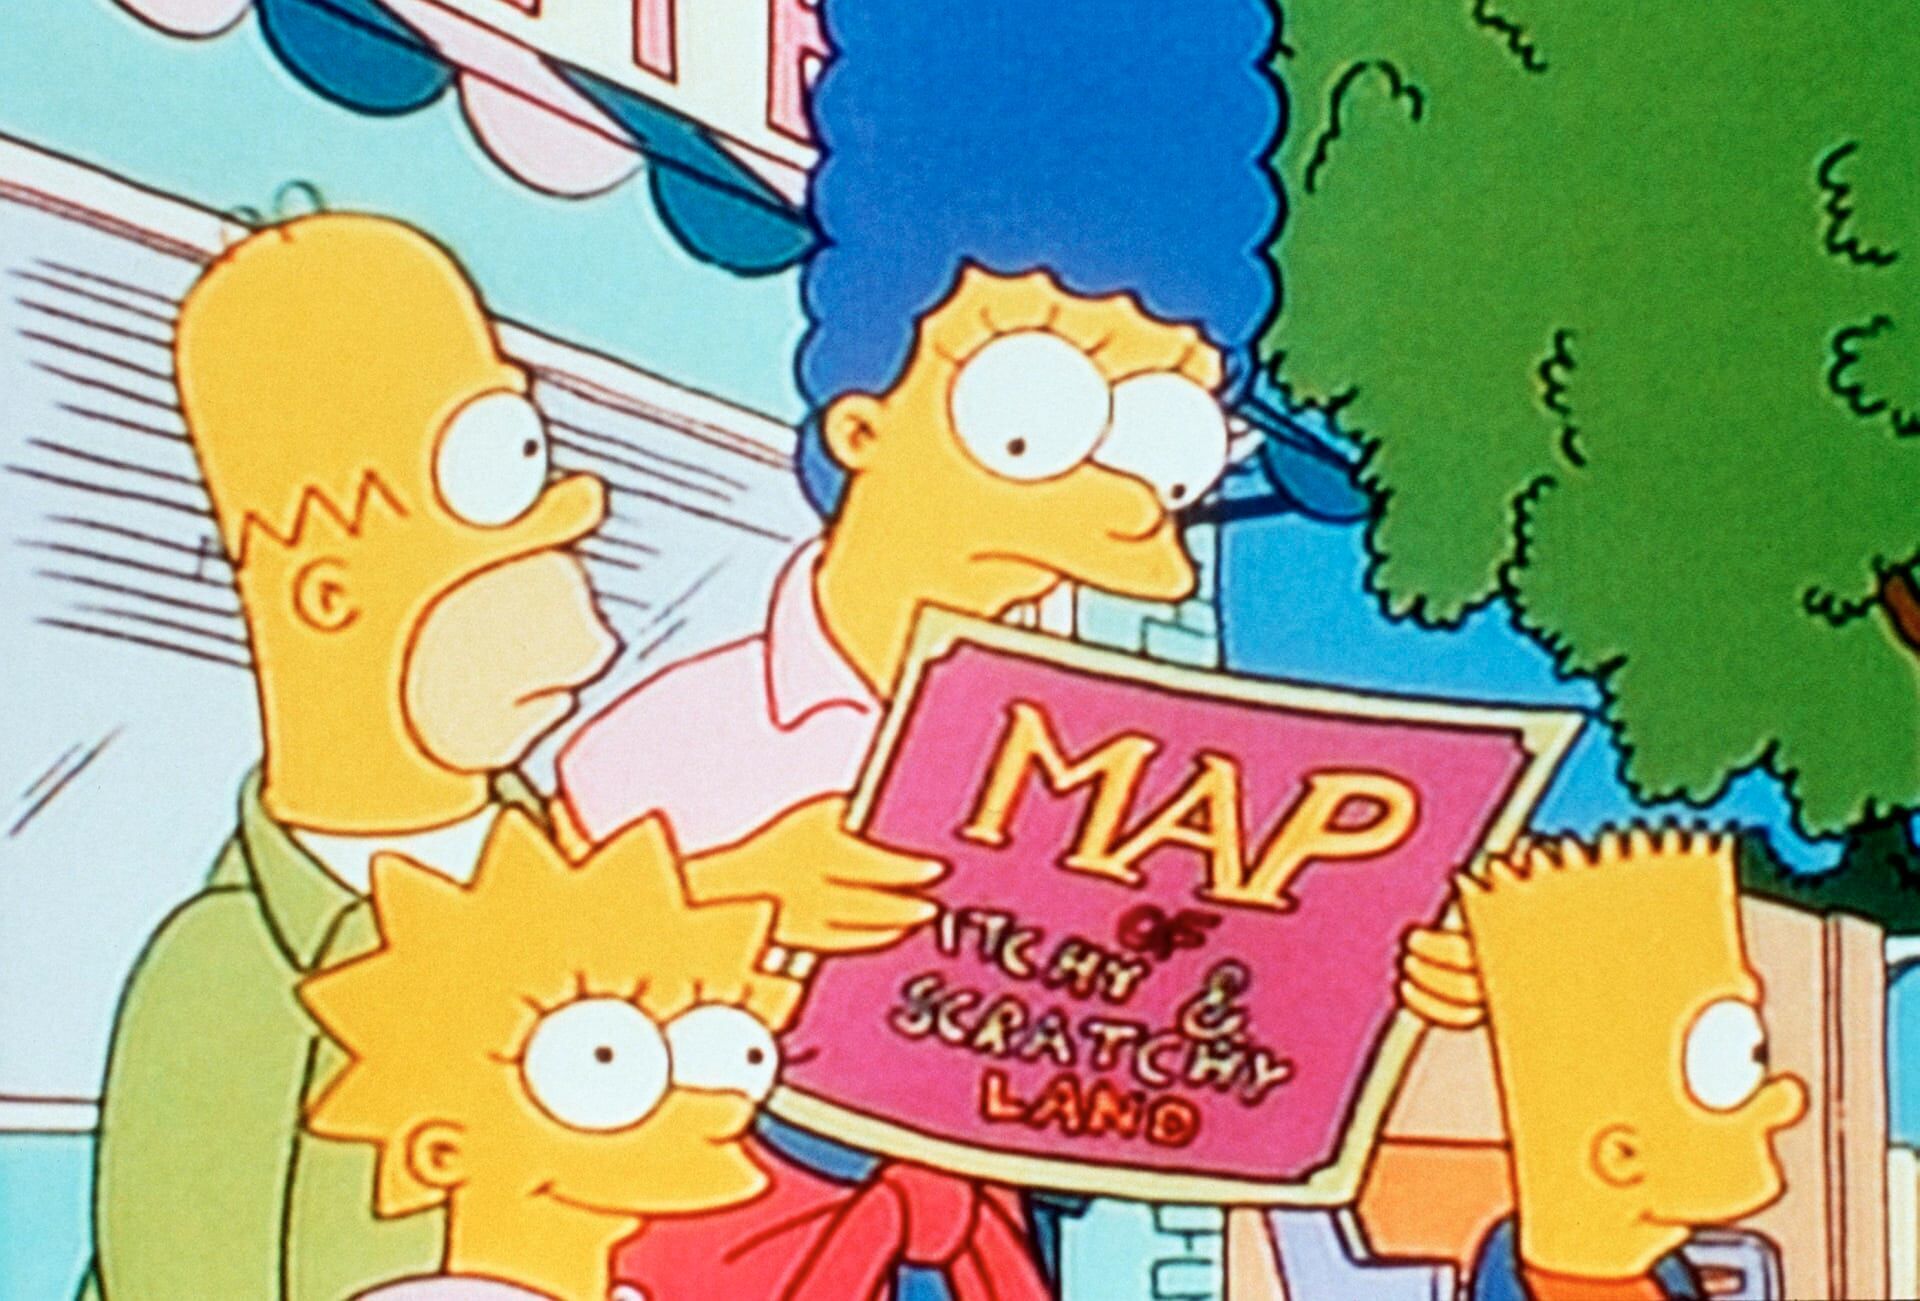 The Simpsons - Itchy & Scratchy Land